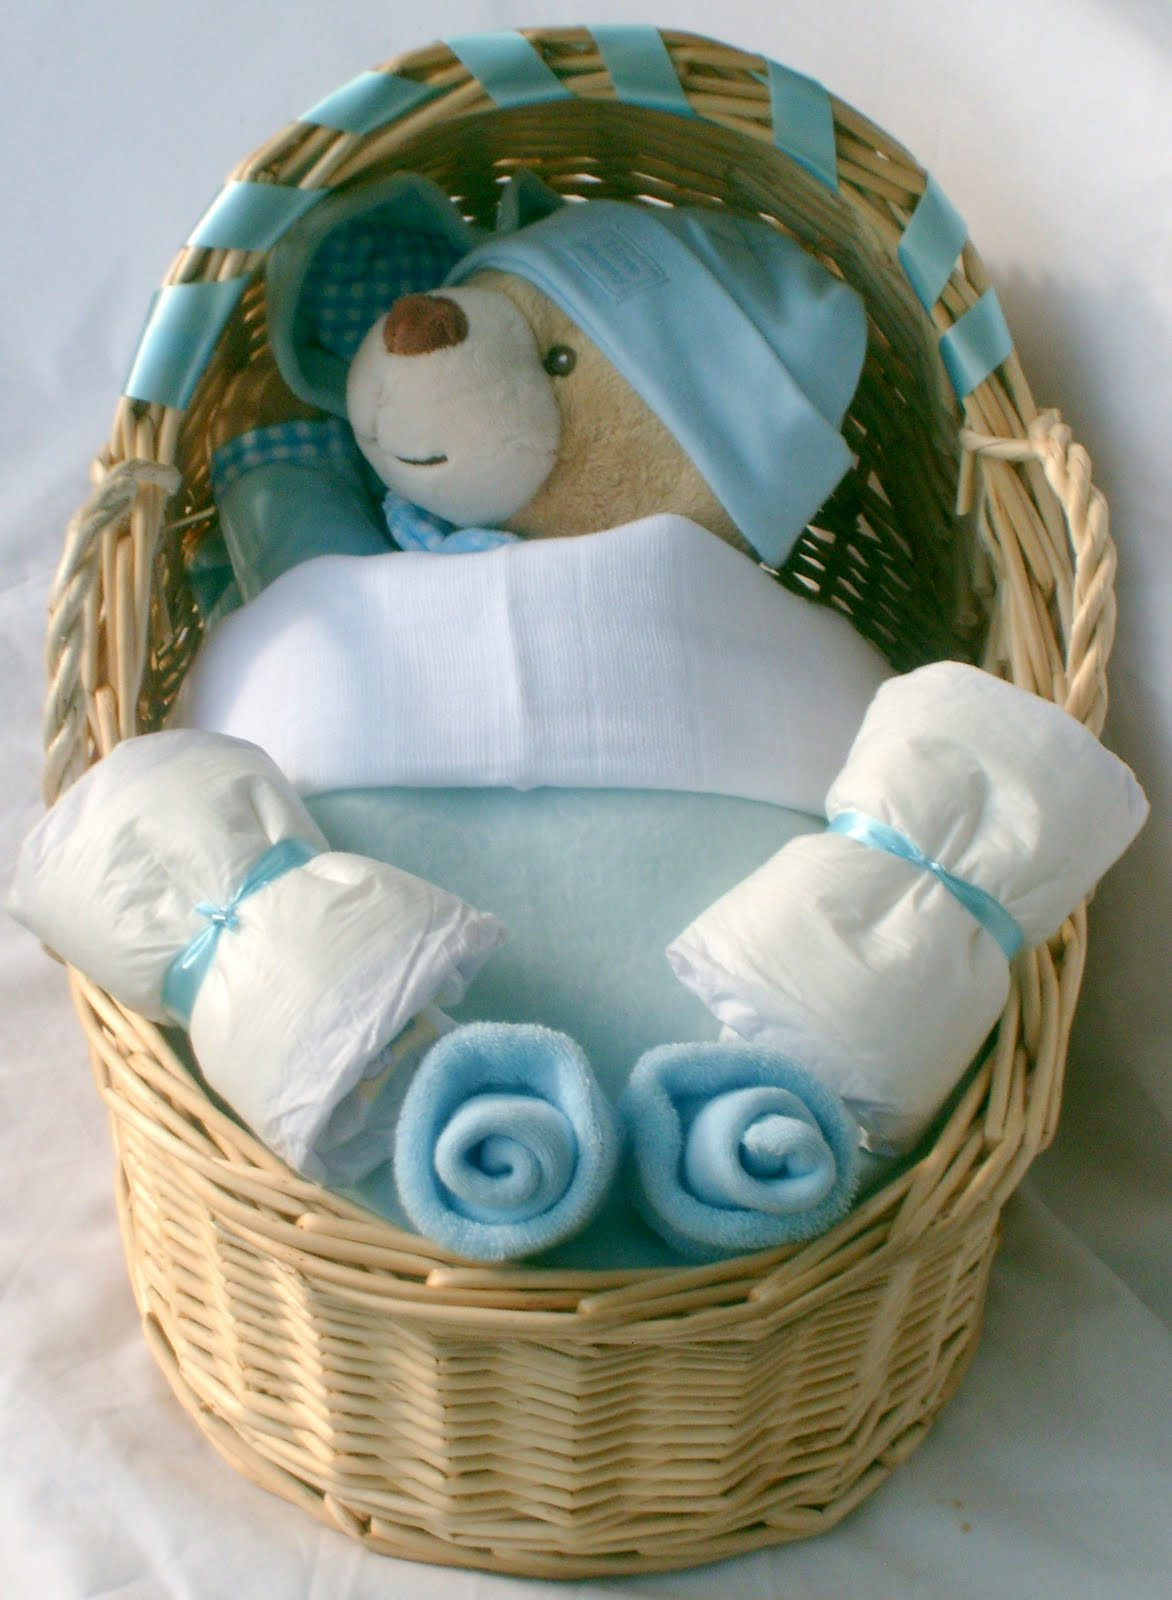 Gift Basket New Baby
 New Baby Gift Baskets